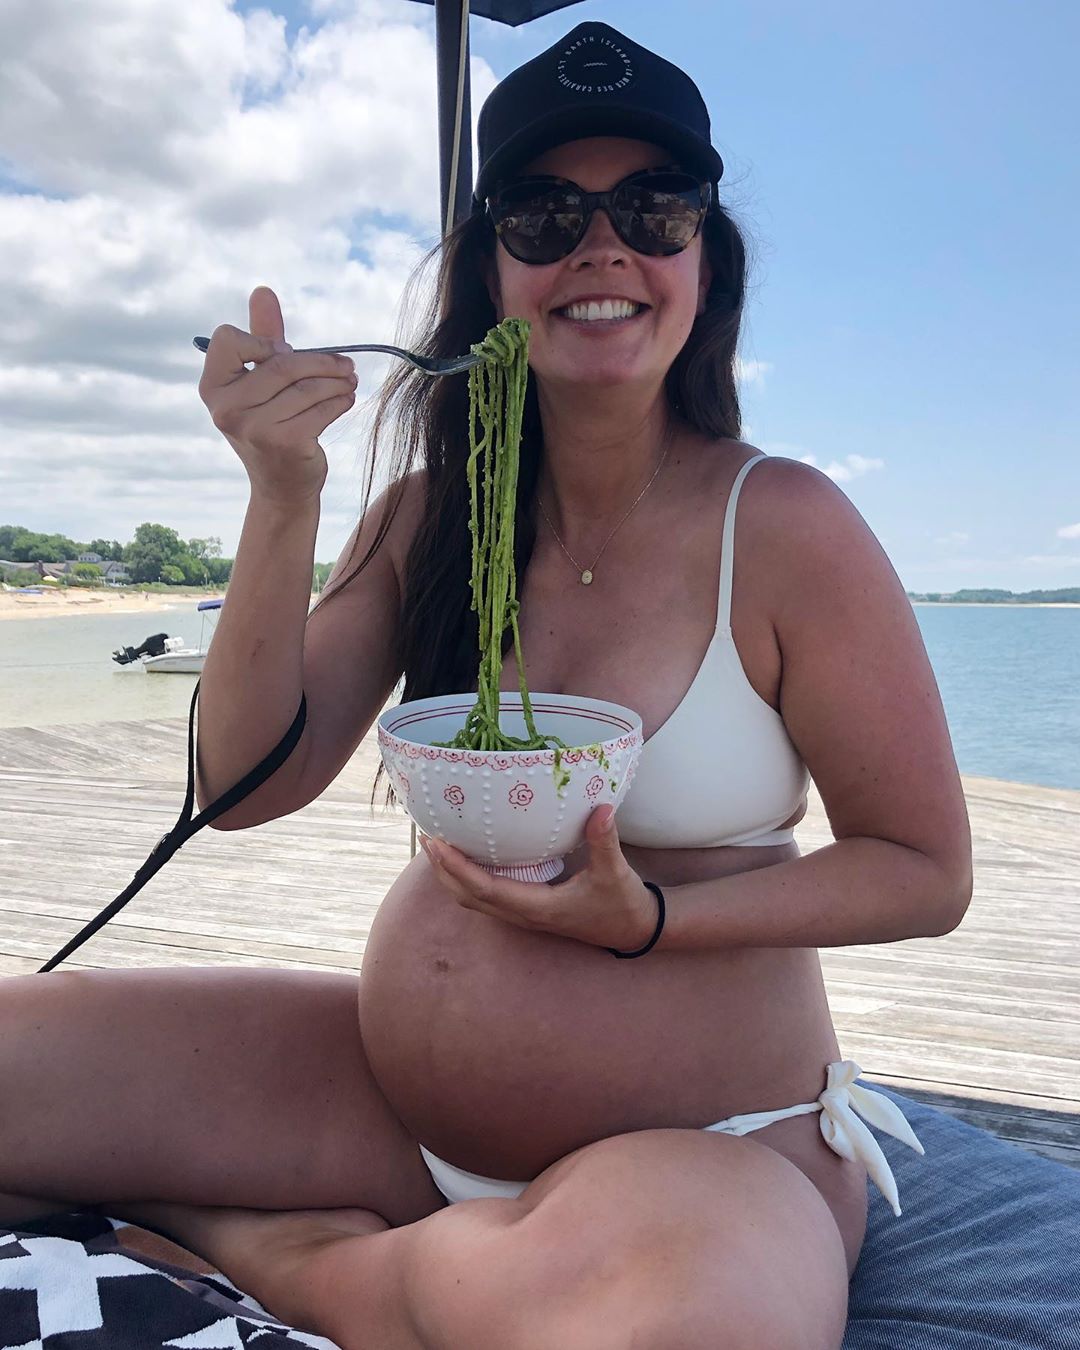 Pregnant Celebrities Show Off 3rd Trimester Baby Bumps in Bikinis